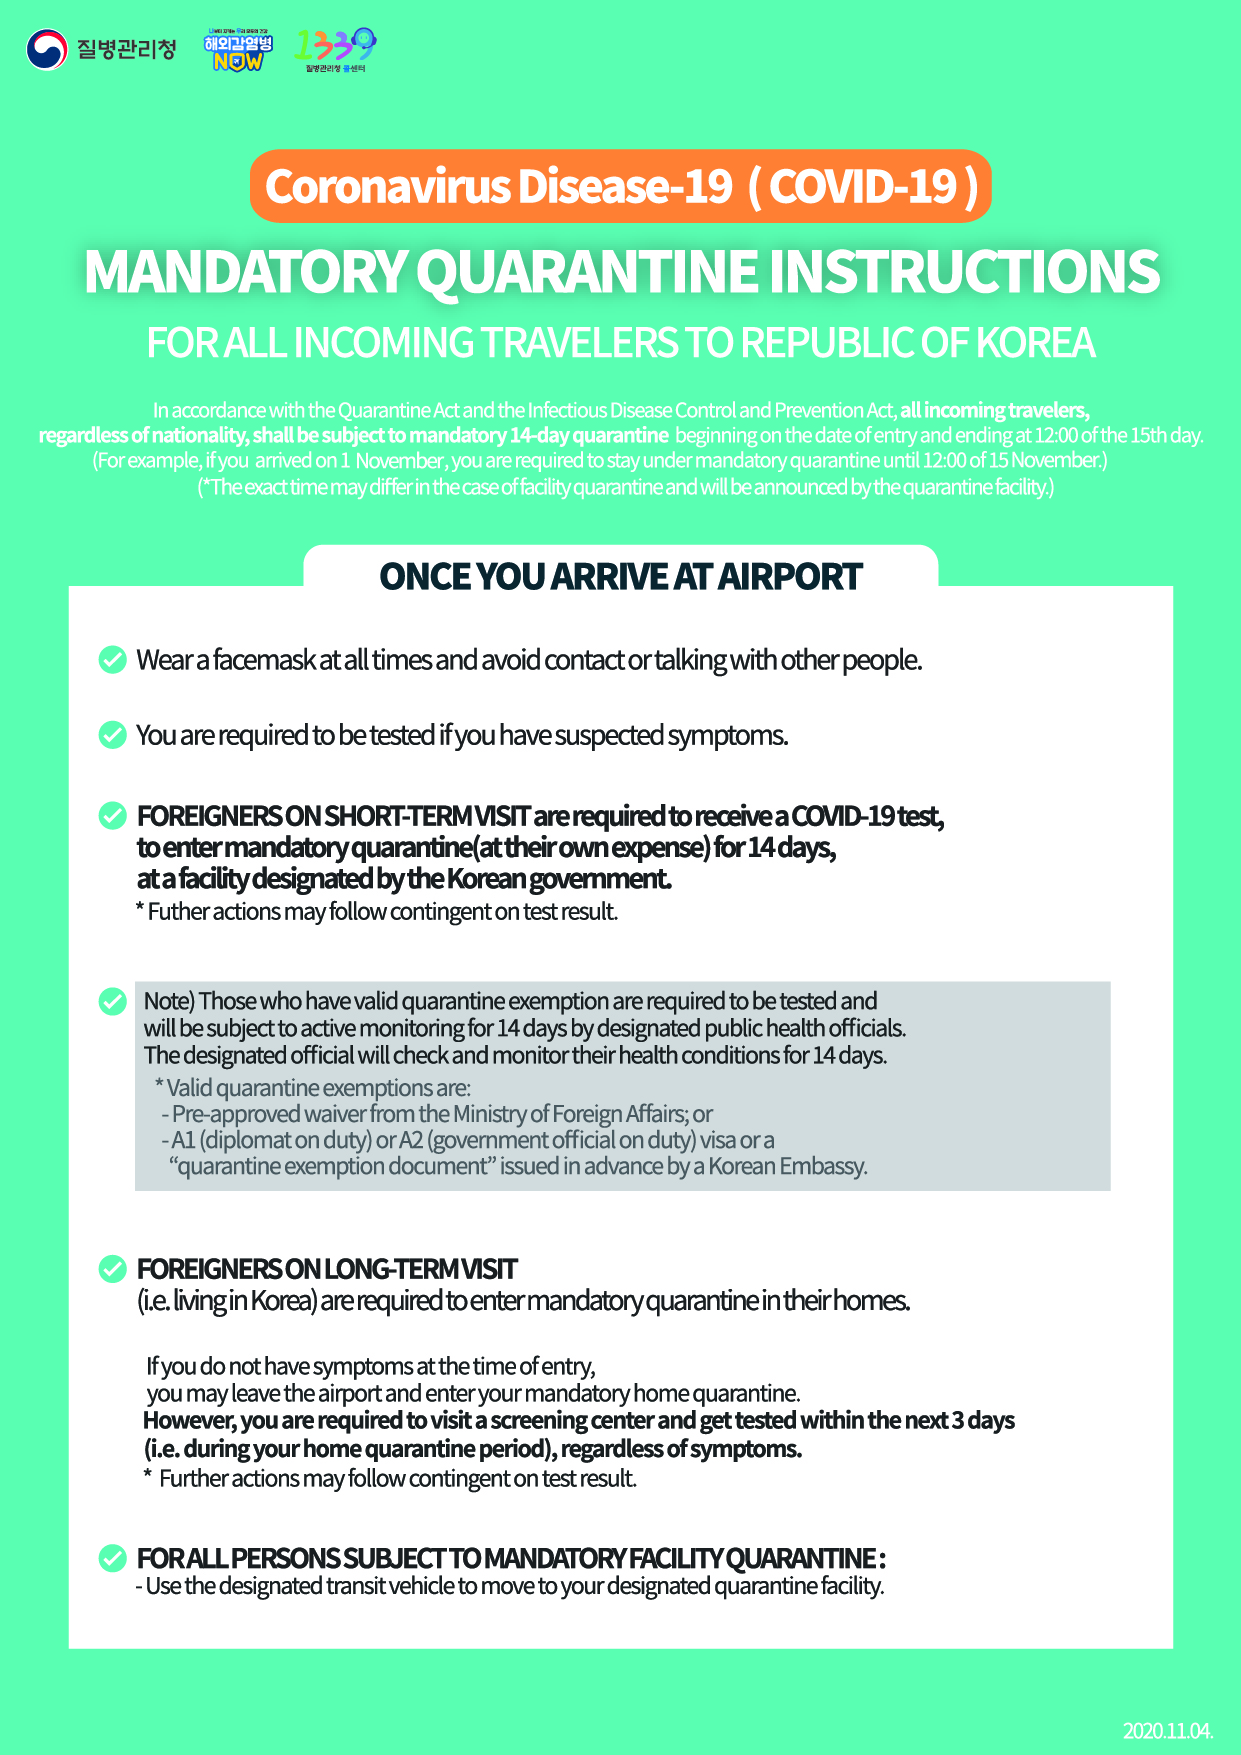 For Entrants to Korea Instructions for Quarantine Subjects April 6. 2020. 1. You should go into quarantine for 14 days following entry to prevent infection with COVID-19 in accordance with the Quarantine Act and the Infectious Disease Control and Prevention Act. 2. Foreign nationals for short-term stay should go into isolation at a facility designated by the Korean government at their own expense and foreigners who are long-term should go into self-quarantine in their homes. Note that those exempted from quarantine among short-term foreigners should undergo the diagnostic tests and be under active surveillance in which designated public officials check on their health conditions for 14 days. *Exempted from isolation: Entrants acquiring pre-approved waiver through the Ministry of Foreign Affairs - Those holding A1 (Diplomat), A2 (Government official), or A3 (Agreement) visa or acquiring “self-quarantine exemption document” in advance of entry issued by the Korean Embassy 3. You must wear a facemask all the time and minimize contact or conversation with others right after arriving at airport.4. The diagnostic tests will be conducted on symptomatic arrivals identified at the quarantine stage and foreigners arriving from Europe, including even asymptomatic ones. The following measures will be taken according to the test results. 5. Asymptomatic entrants from all parts of the world except for Europe should undergo the diagnostic tests when any symptom appears while being quarantined in homes or facilities. 6. When heading to home from airport, using your private car is recommended. If it is not available, you should use specially designated airport limousine bus or KTX (designated cars). You should directly go home and dropping by other places is not allowed. Right after arriving home, quarantine subjects should dial to local health centers and inform them you are under quarantine. 7. Those under facility isolation should move to the designated quarantine facilities by specially designated cars. 8. Self-quarantine subjects are mandated to install the “self-quarantine safety protection app” developed by the Ministry of the Interior and Safety, and follow self-diagnosis and self-quarantine rules for 14 days. <Guideline for Quarantine Subjects> ◇ Guideline for Quarantine Subjects - Refrain from going out of the isolation place to prevent infection from spreading - Self-quarantine subjects should stay in a separate place and common rooms are frequently ventilated - If it is not possible to stay alone in a separate place, ask help from local health centers - In case outing is necessary, such as medical appointment, make sure you contact to local health center first - Avoid sharing your personal items (personal towels, eating utensils, cell phones, etc.) with your family members or housemates - In case of symptoms such as fever, cough, respiratory difficulties, immediately report to the local health center ◇ Guideline for Families and Housemates of Quarantine Subjects - Family members or housemates refrain from contact with self-quarantine subject as much as possible - When contact with the subject is unavoidable, wear a facemask and maintain a 2-meter distance - Closely monitor health condition of self-quarantine subject - Frequently clean commonly touched surfaces including tabletops, door knobs, bathroom fixtures, keyboards, and etc. - If your work involves coming into contact with many people or if you work in a publicly used venue (including but not limited to school, private classes, preschool, kindergarten, social welfare facility, postpartum care center, and healthcare institution), you need to limit or reduce your work capacity as best as possible to minimize contact until the end of the quarantine period. 9. If you do not fully comply with those stated above, you will face up to 1 year in prison or a 10-million won fine in accordance with the relevant laws. In case the infectious disease spreads or additional infection control measure is implemented including facility closure due to violation of the regulations, such violators may be subject to claims for damages. Also, they could face cancellation of visa (residency status), deportation, or ban on reentry into Korea, etc. <Personal Hygiene> - Wash your hands thoroughly with soap and running water for over 30 seconds - Cover your nose and mouth using your upper sleeves when coughing - Do not touch your eyes, nose, or mouth with unwashed hands - Frequently ventilate your rooms - Wear a mask in case any symptom appears including fever, or respiratory symptom, or you visit a medical institution <Usage of self-quarantine safety protection app> *Self-quarantine subjects among entrants from abroad are mandated to install the “self-quarantine safety protection app” developed by the Ministry of the Interior and Safety, and follow self-diagnosis and self-quarantine rules for 14 days. (ID : CORONA)